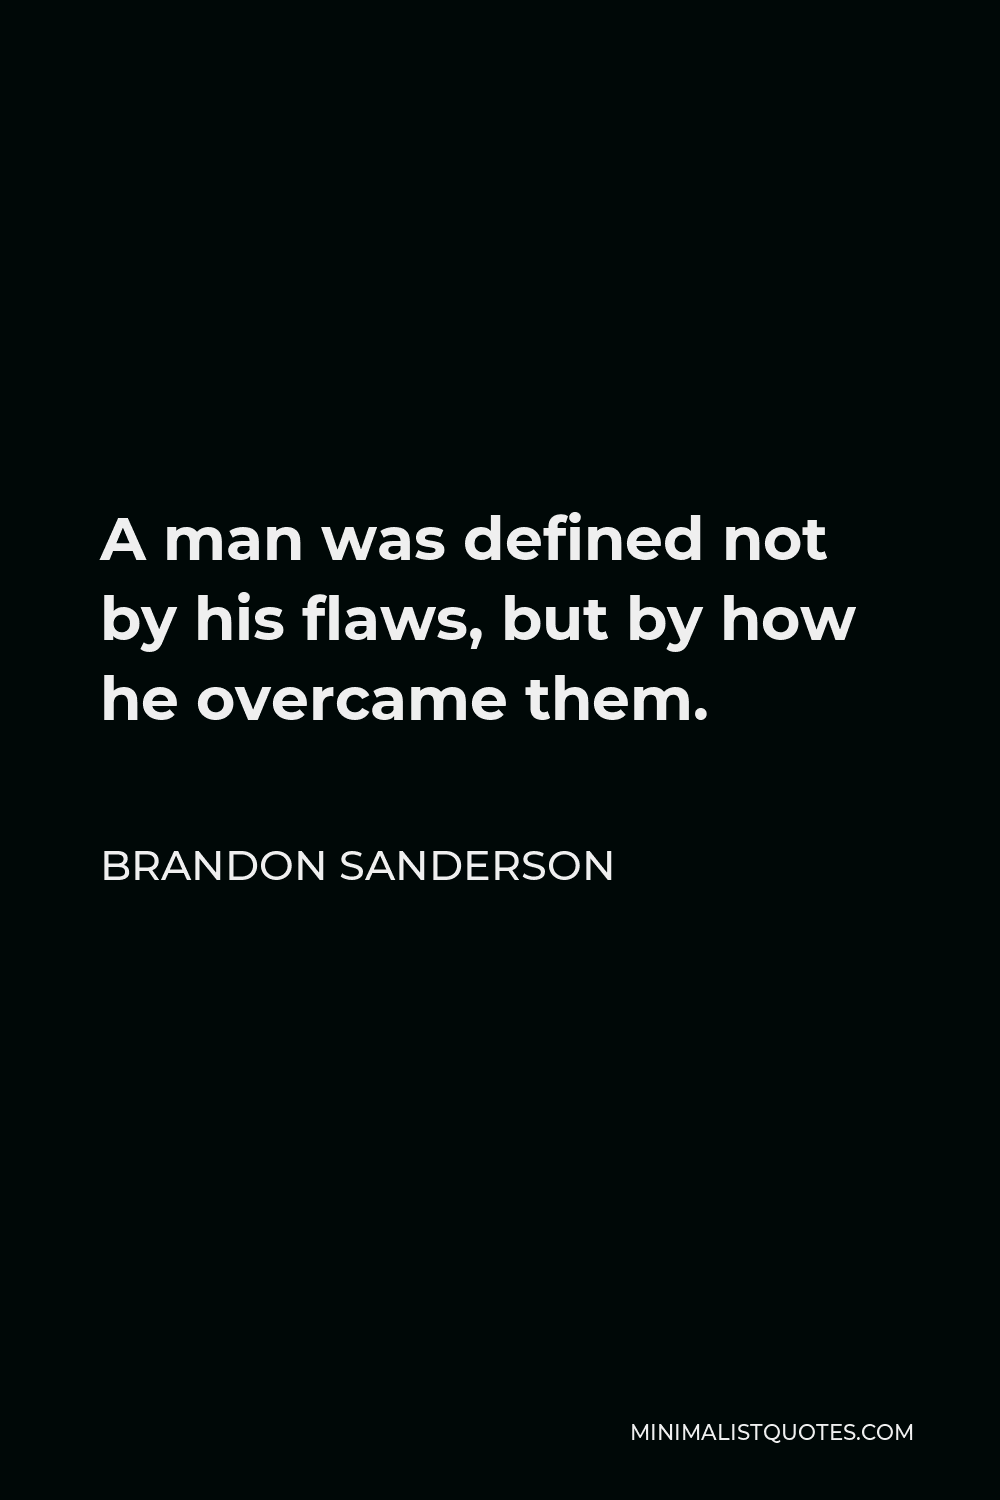 Brandon Sanderson Quote - A man was defined not by his flaws, but by how he overcame them.